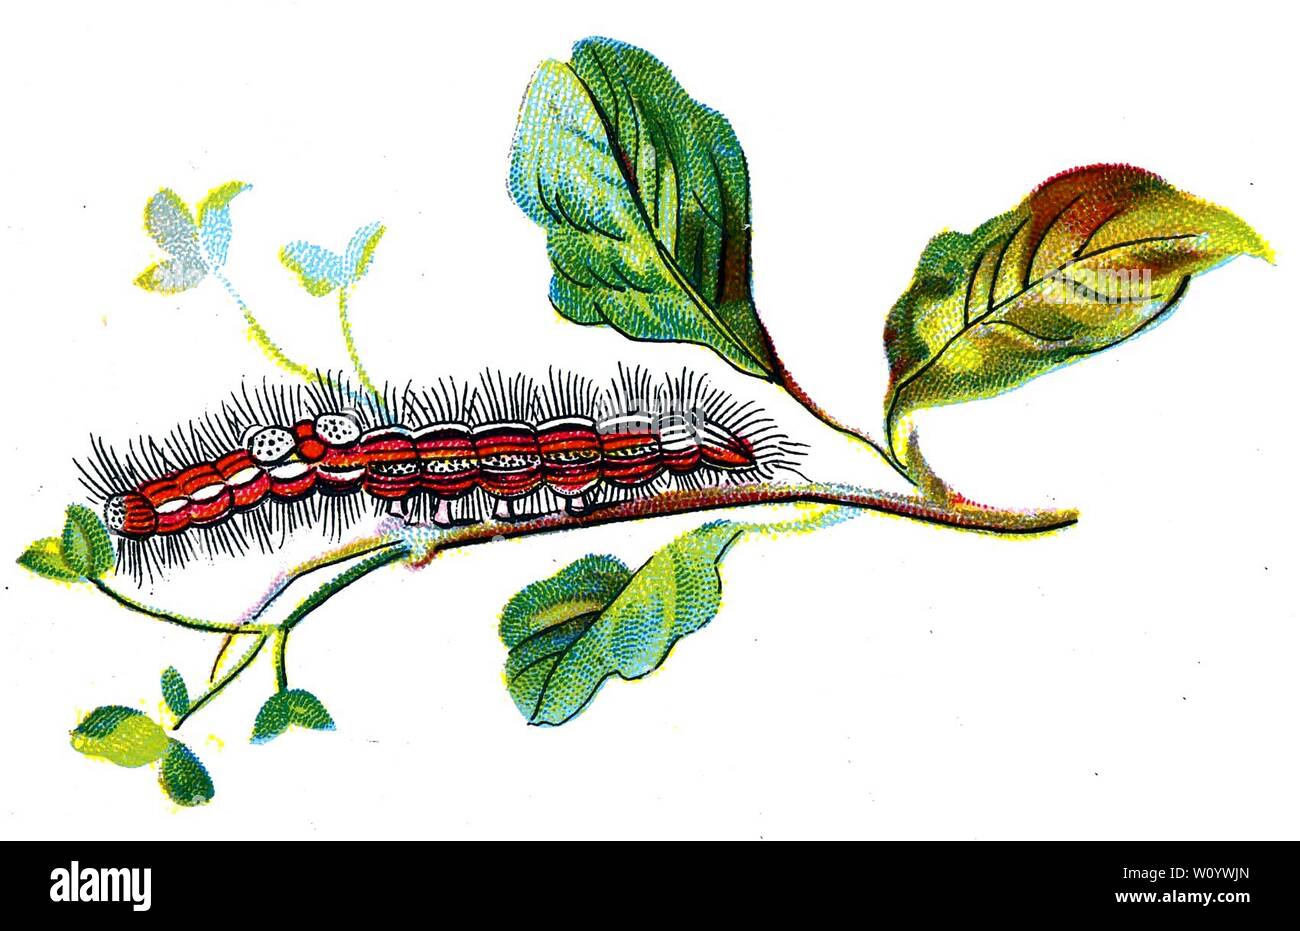 Porthesia similis, The Yellow-Tail Moth caterpillar, Color Butterfly / Moth Lithograph from 1895 book, 'Europe’s Best-Known Butterflies' by F. Nemos Stock Photo